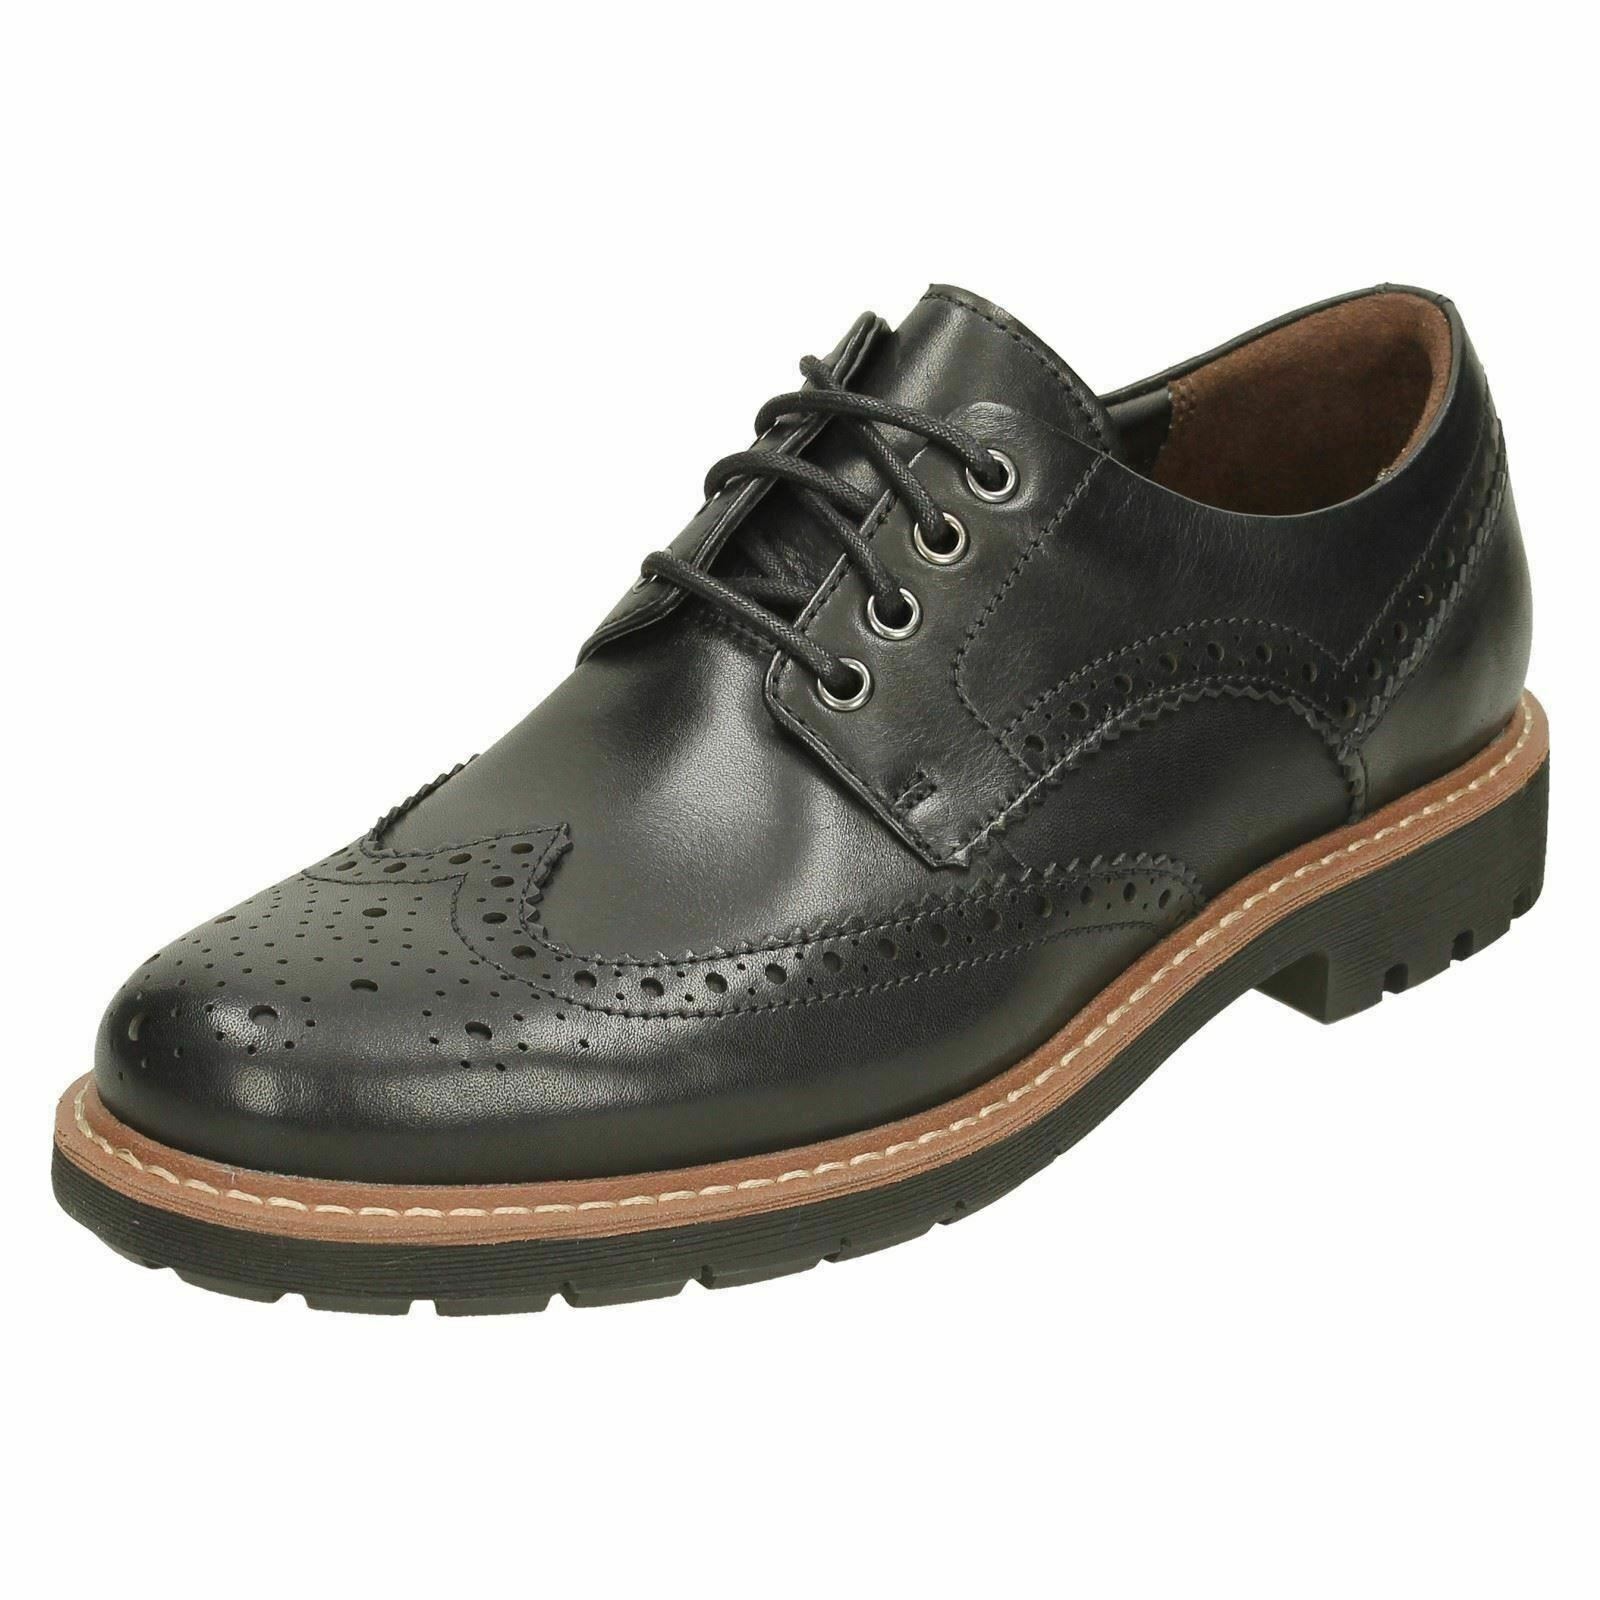 Clarks Men's Batcombe Wing Brogues for sale